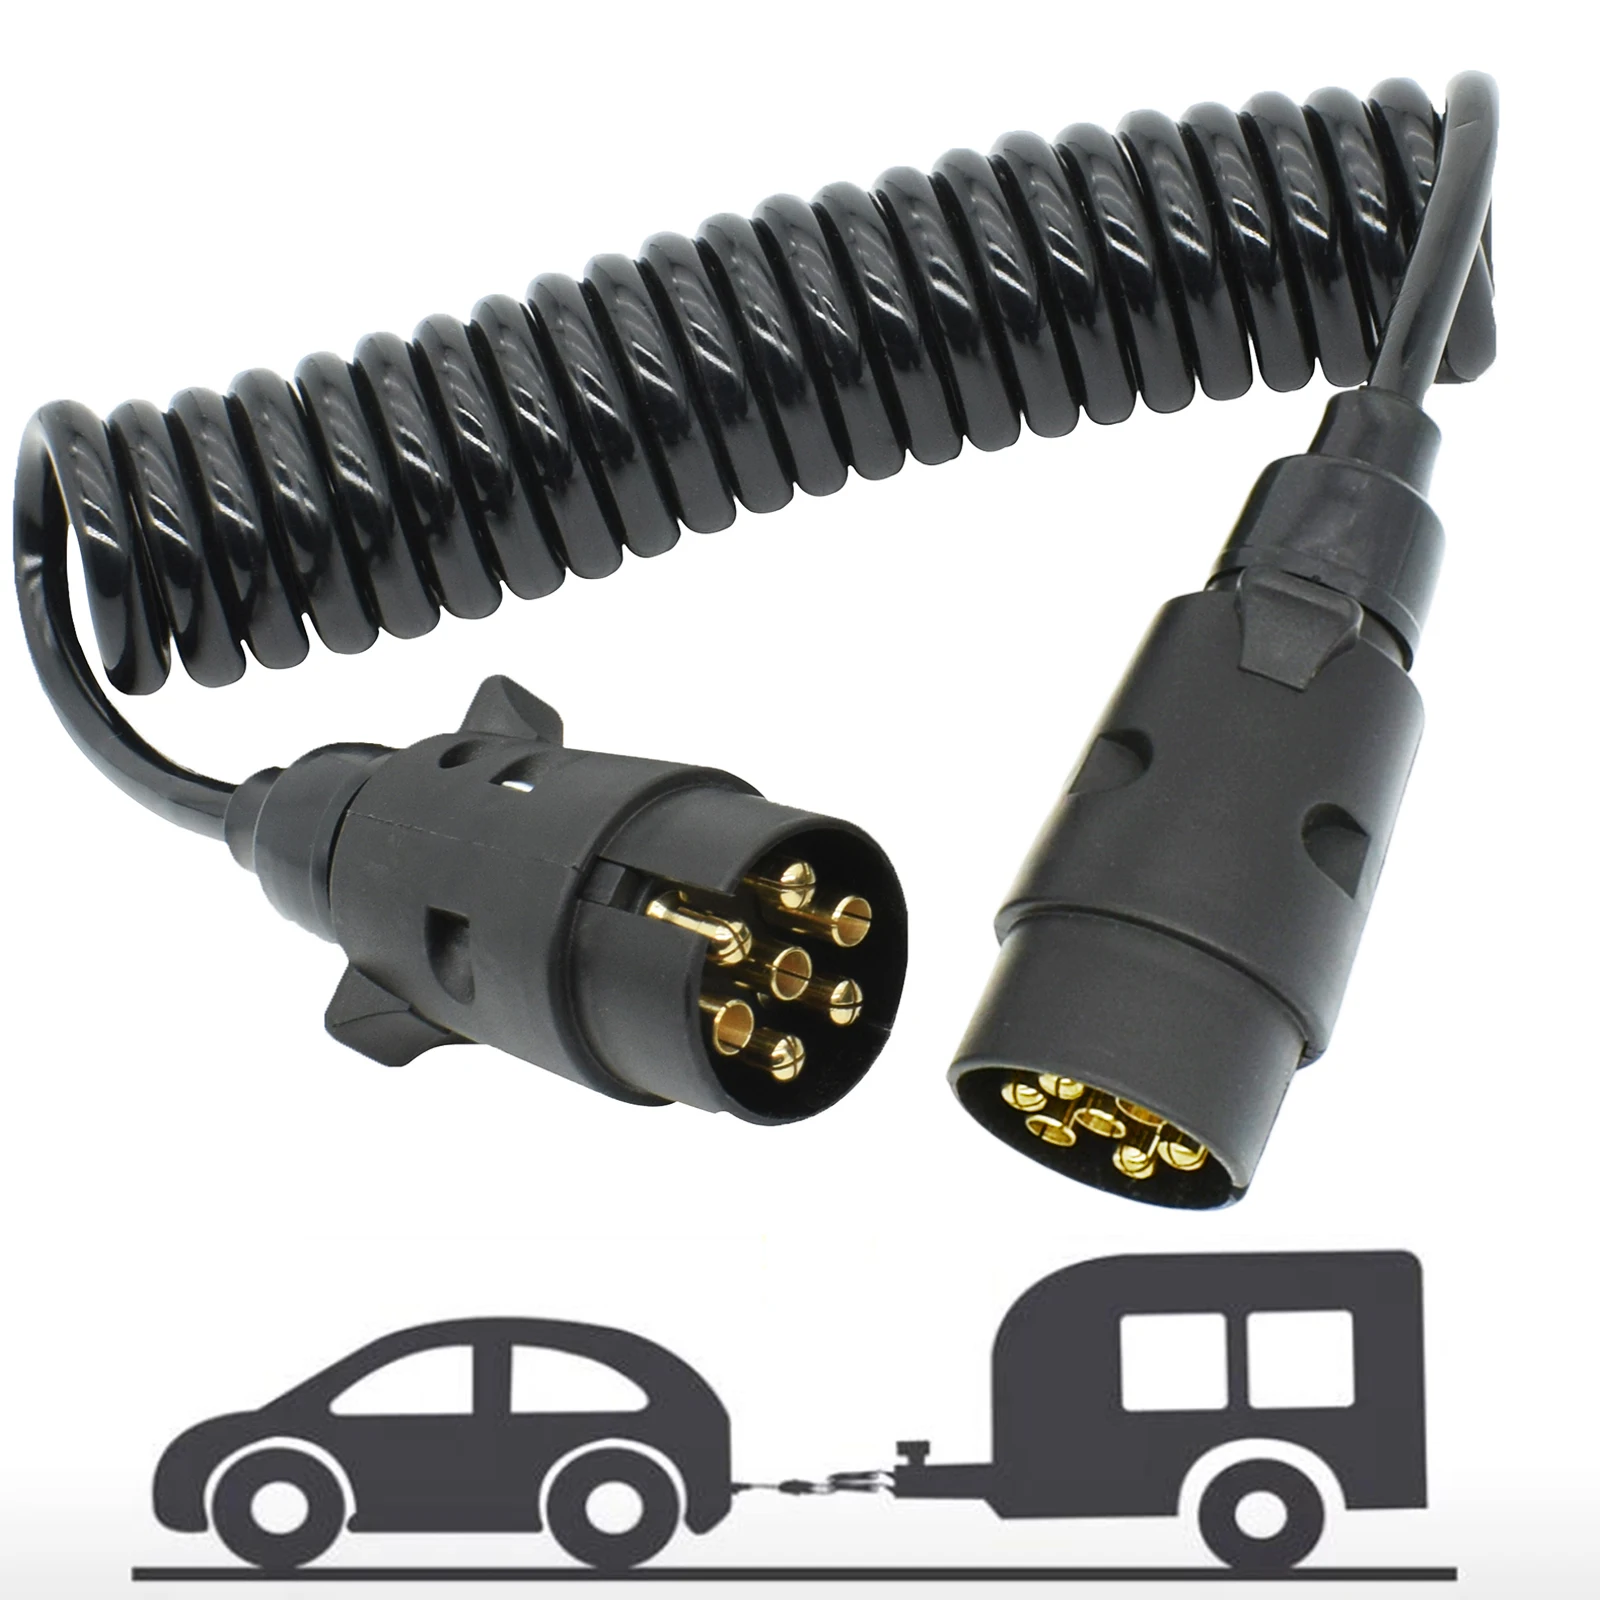 9.8' 7 Pin Truck Light Board Extension Cable Trailer and Power Supply Wire Plug Vehicle Socket Extension Wiring Car Accessories